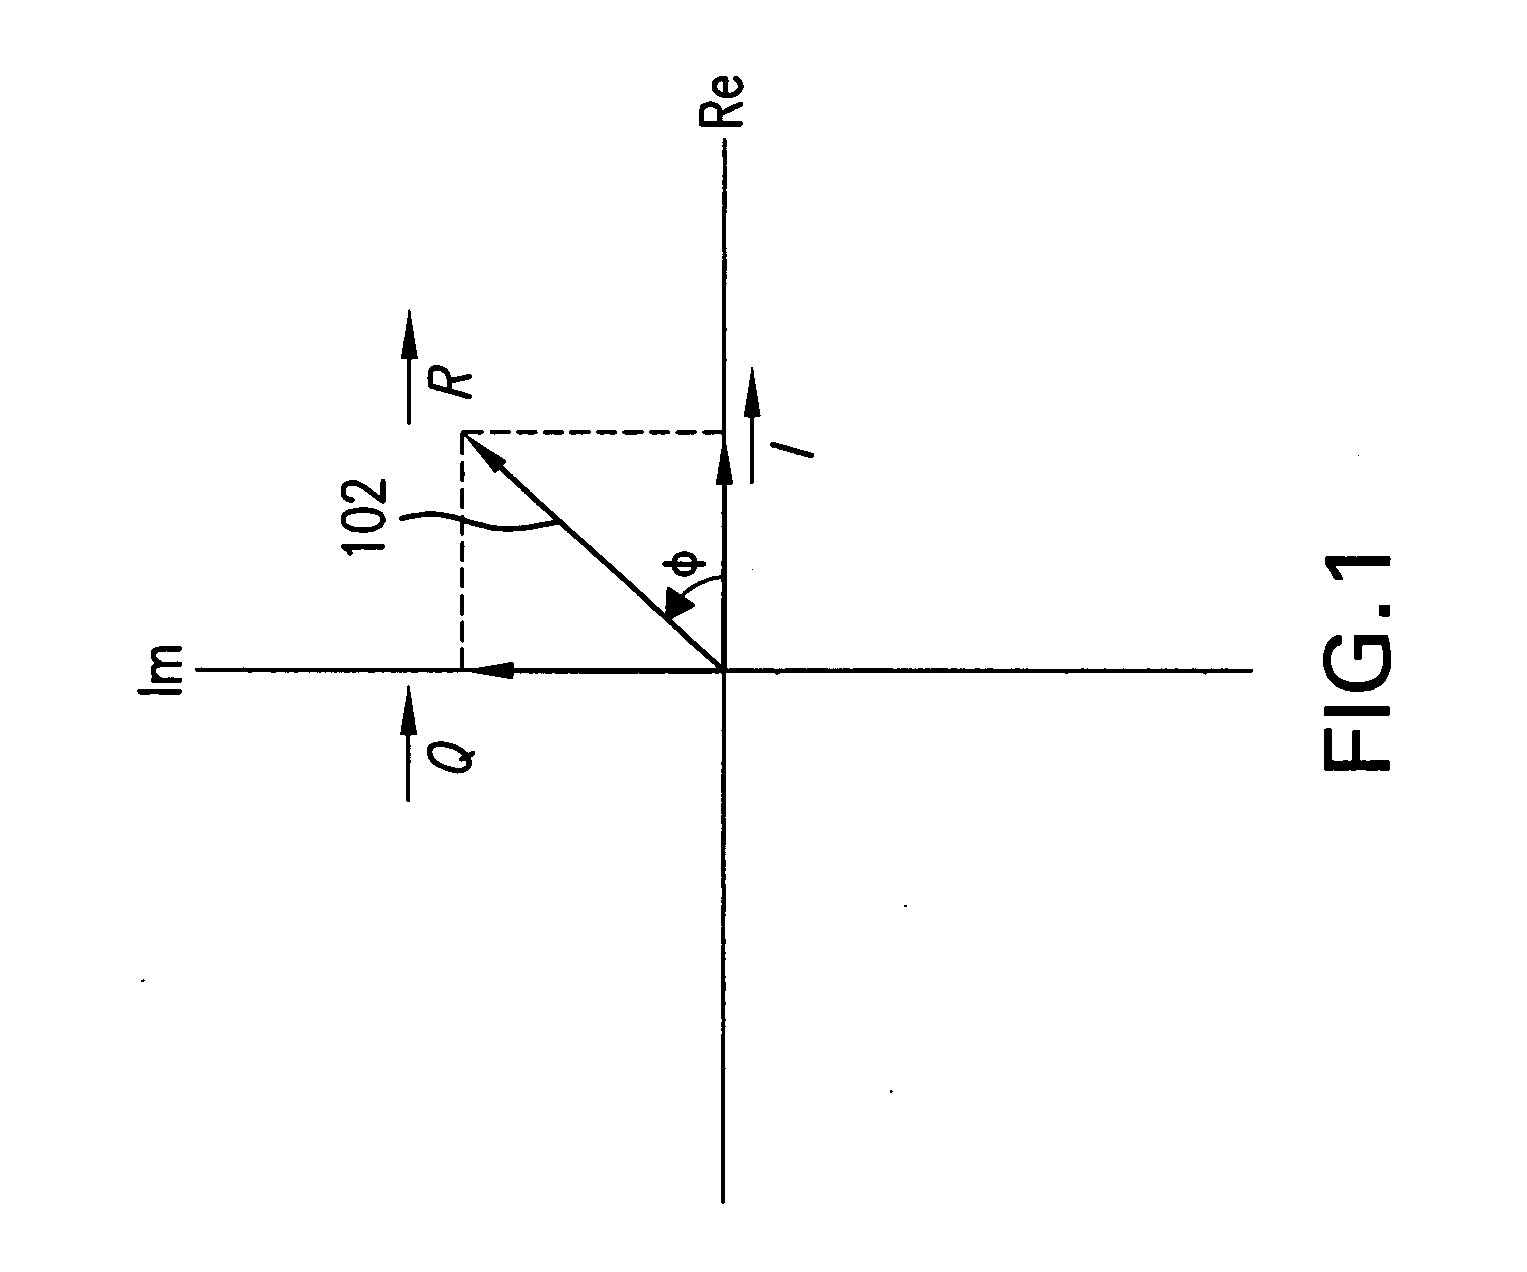 Systems and methods of RF power transmission, modulation, and amplification, including embodiments for compensating for waveform distortion